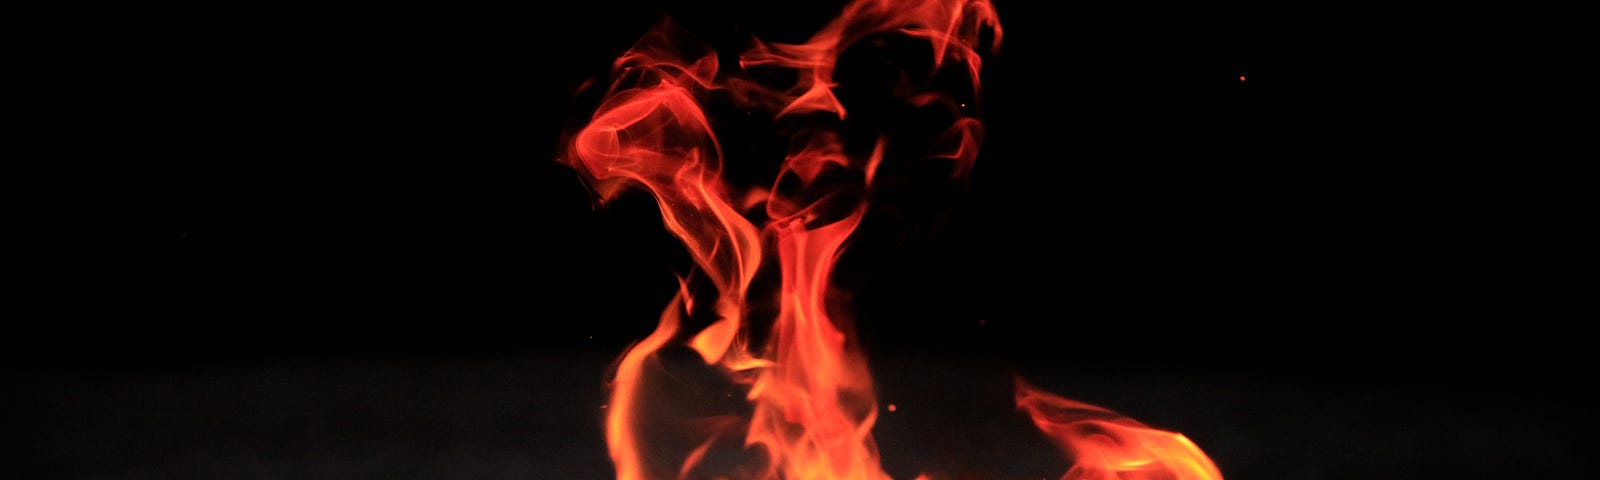 Photo of bright orange, red and yellow-white flames against a black background.